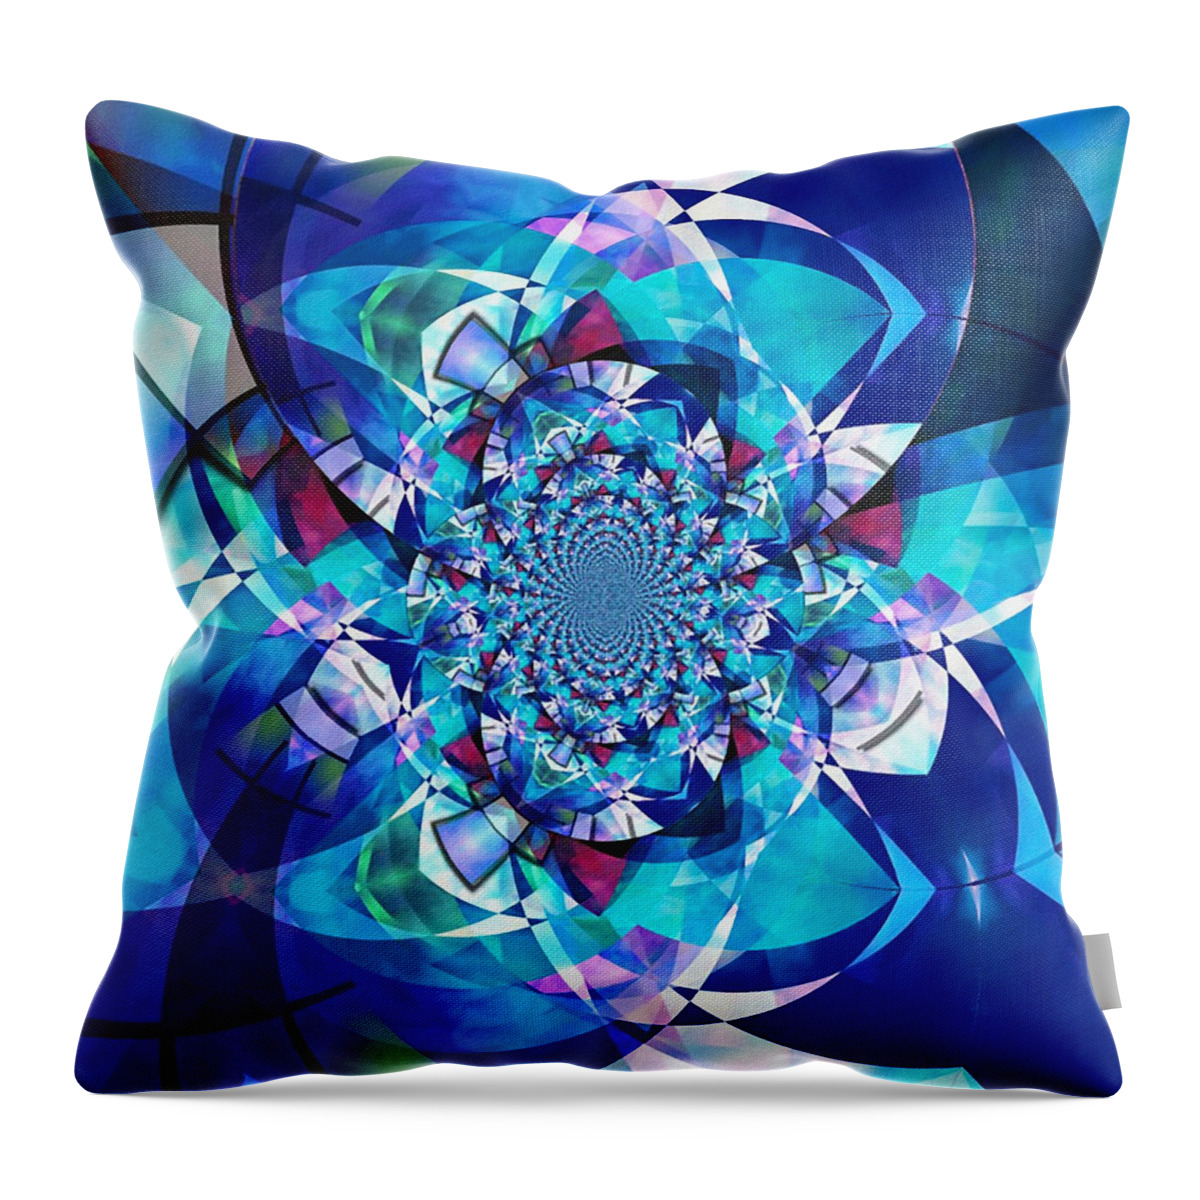 Abstract Throw Pillow featuring the digital art The Game of Light by Bruce Rolff